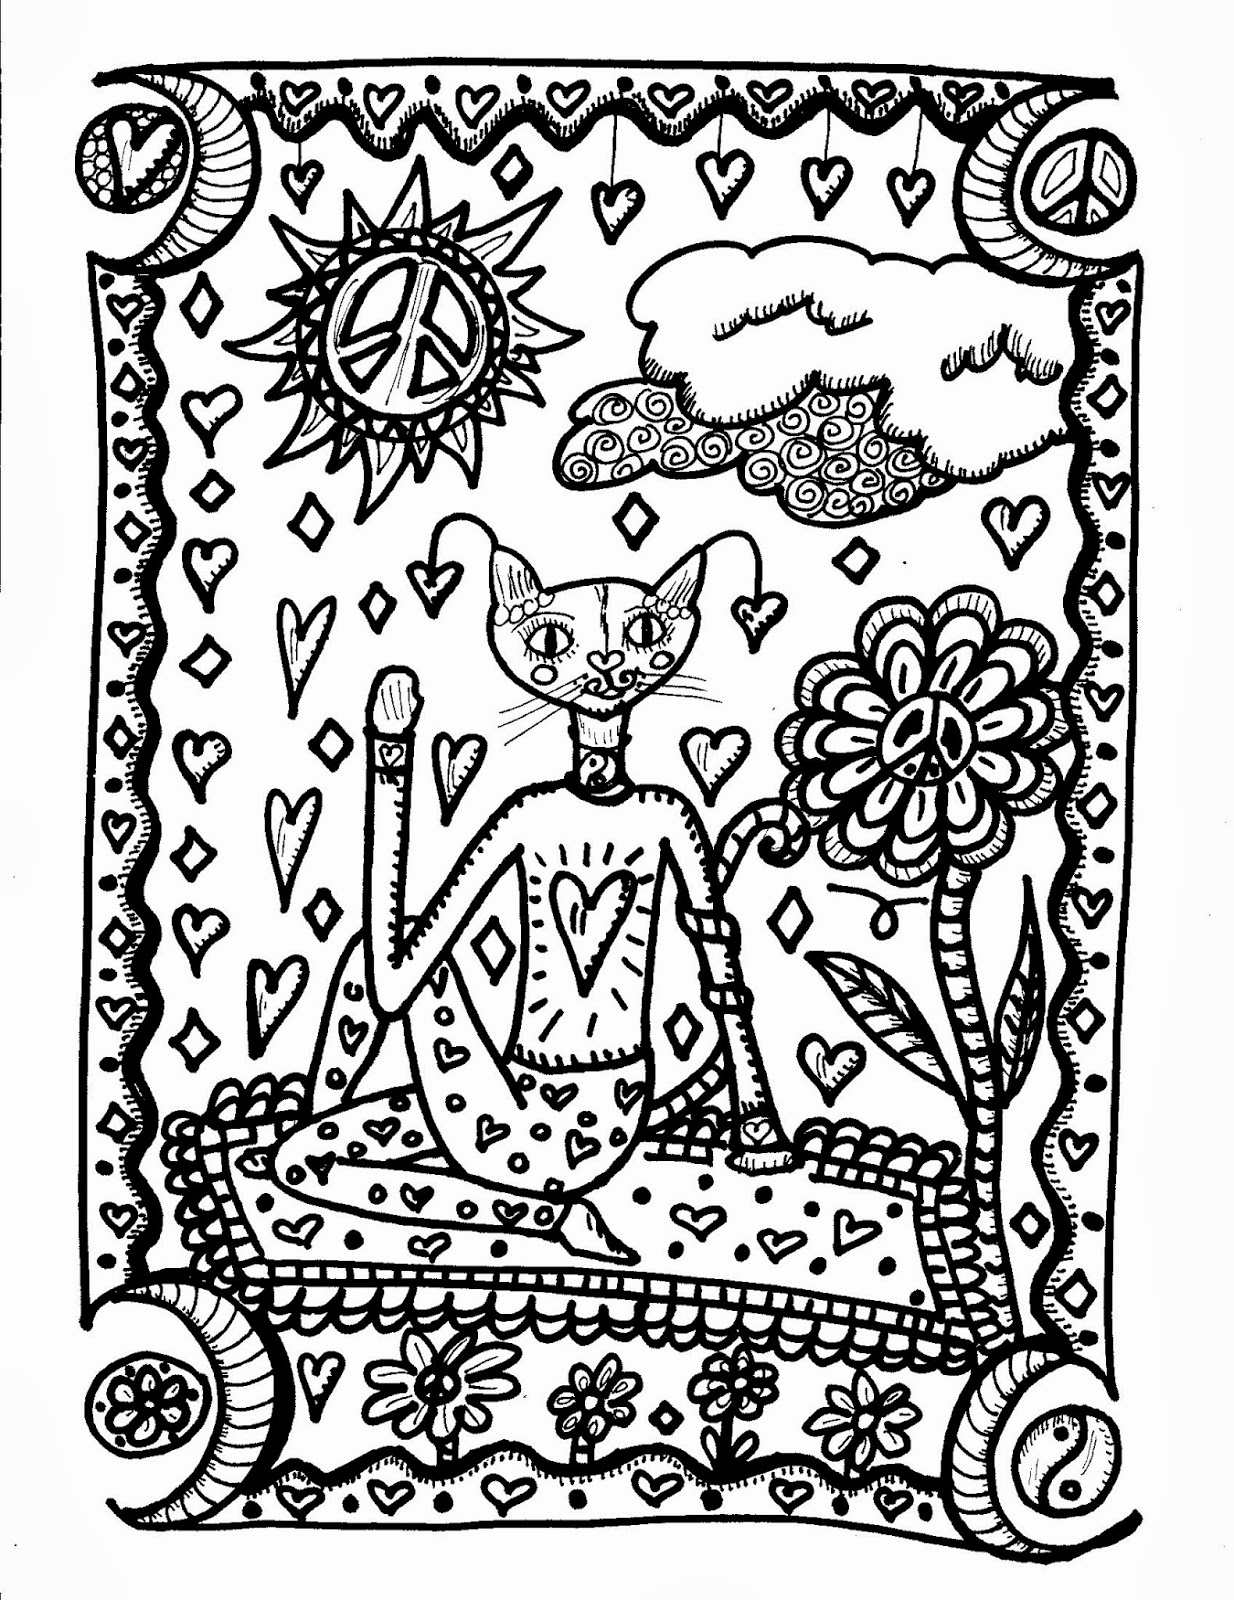 Download Coloring Pages: Coloring Book Zine